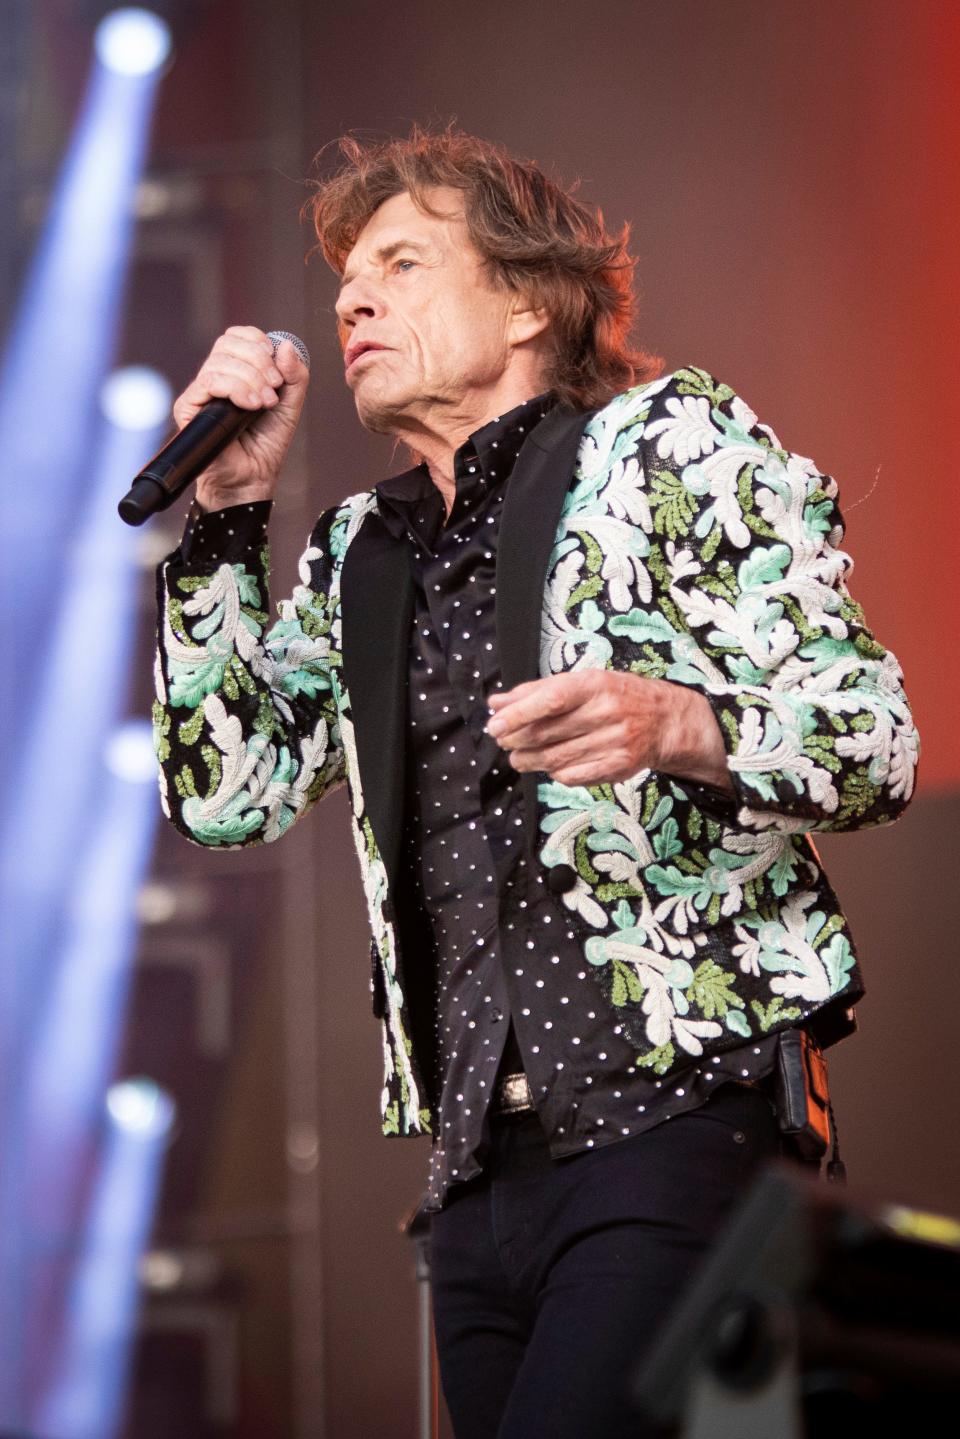 Still rocking: Mick Jagger fronts the Rolling Stones at the BST Hyde Park festival in London on June 25, 2022.